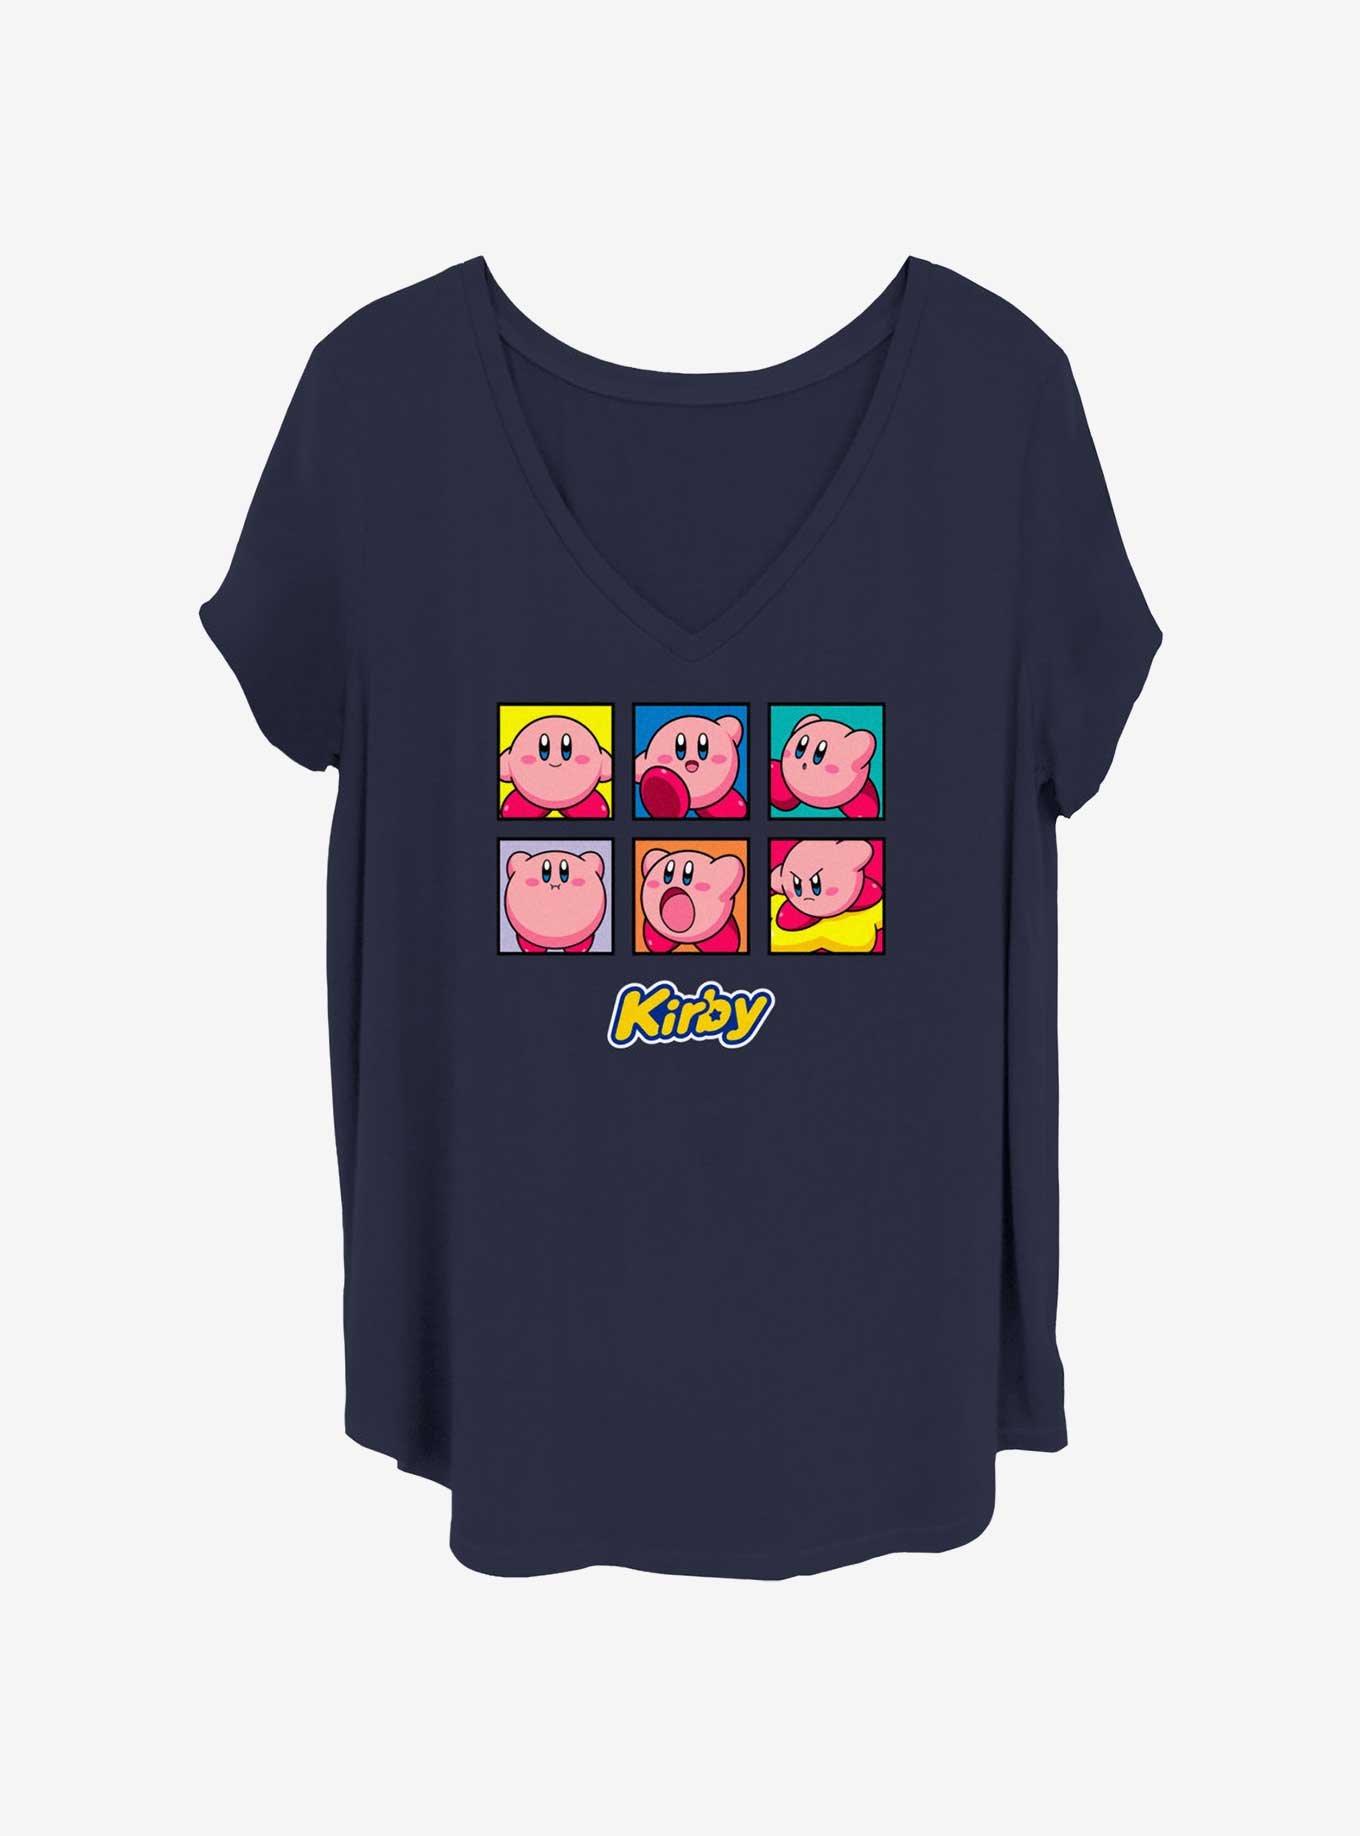 Kirby Expressions Girls T-Shirt Plus Size, NAVY, hi-res